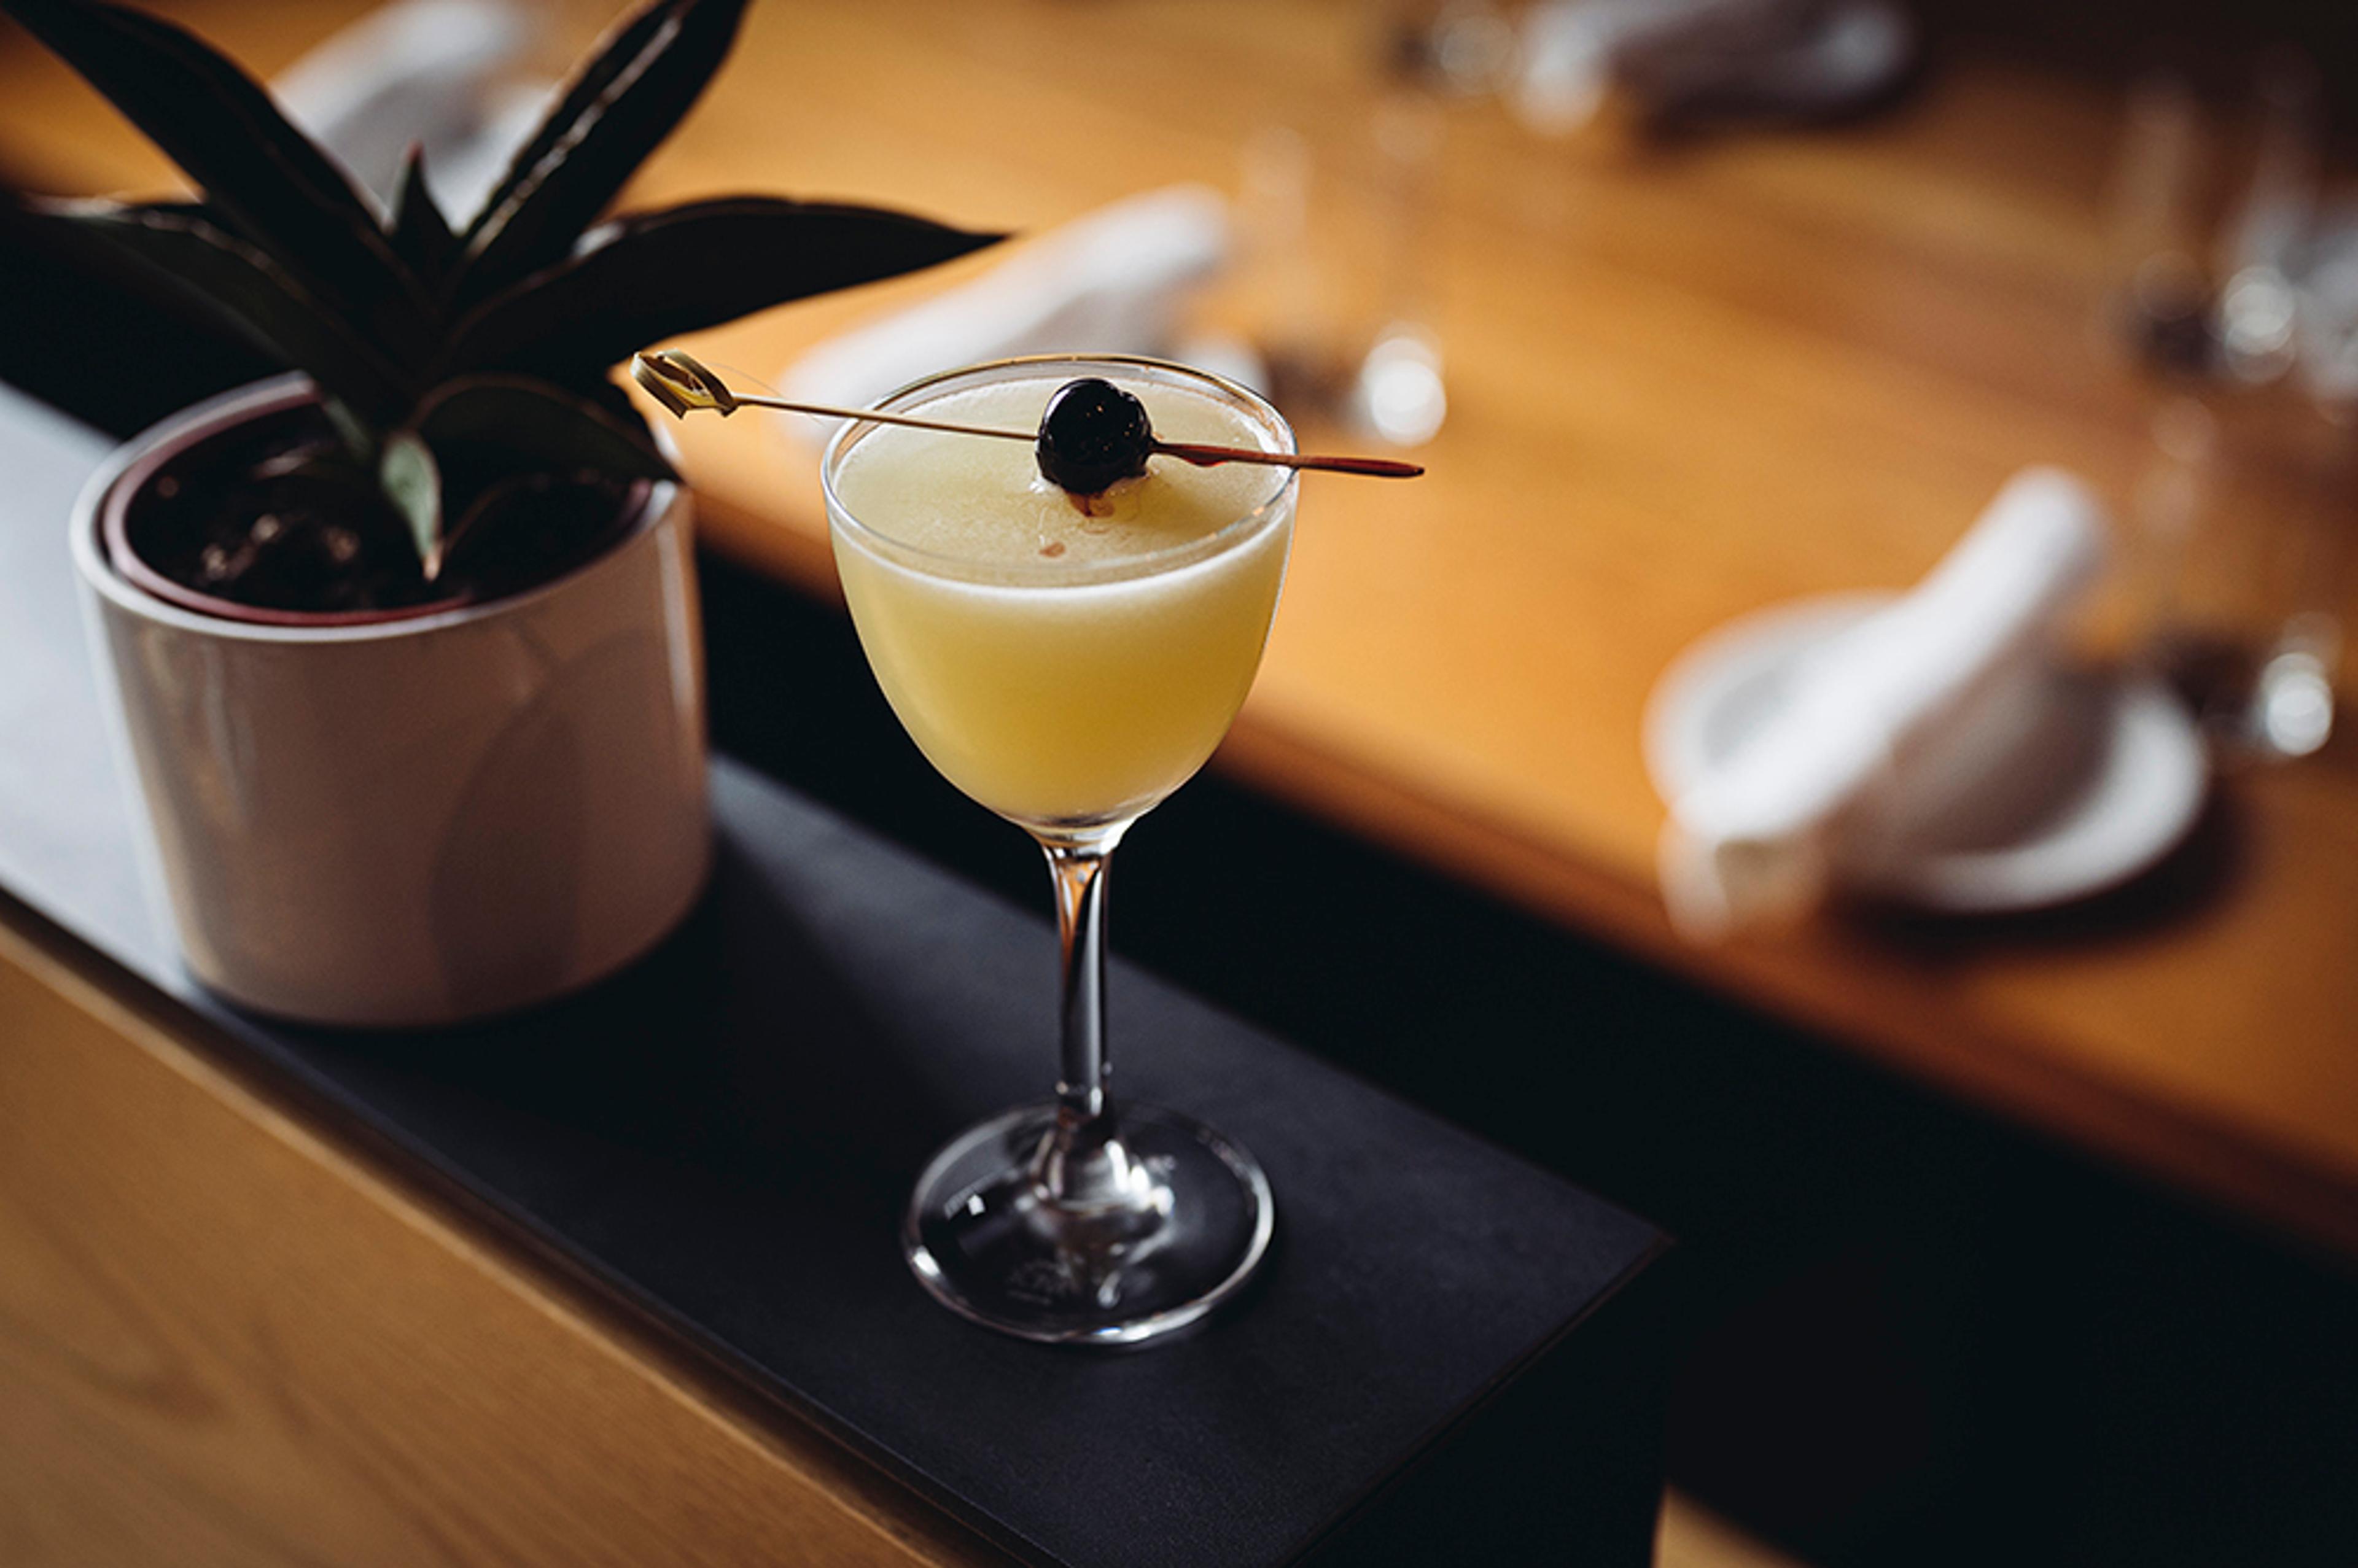 pale yellow cocktail in stem glass with brandied cherry garnish